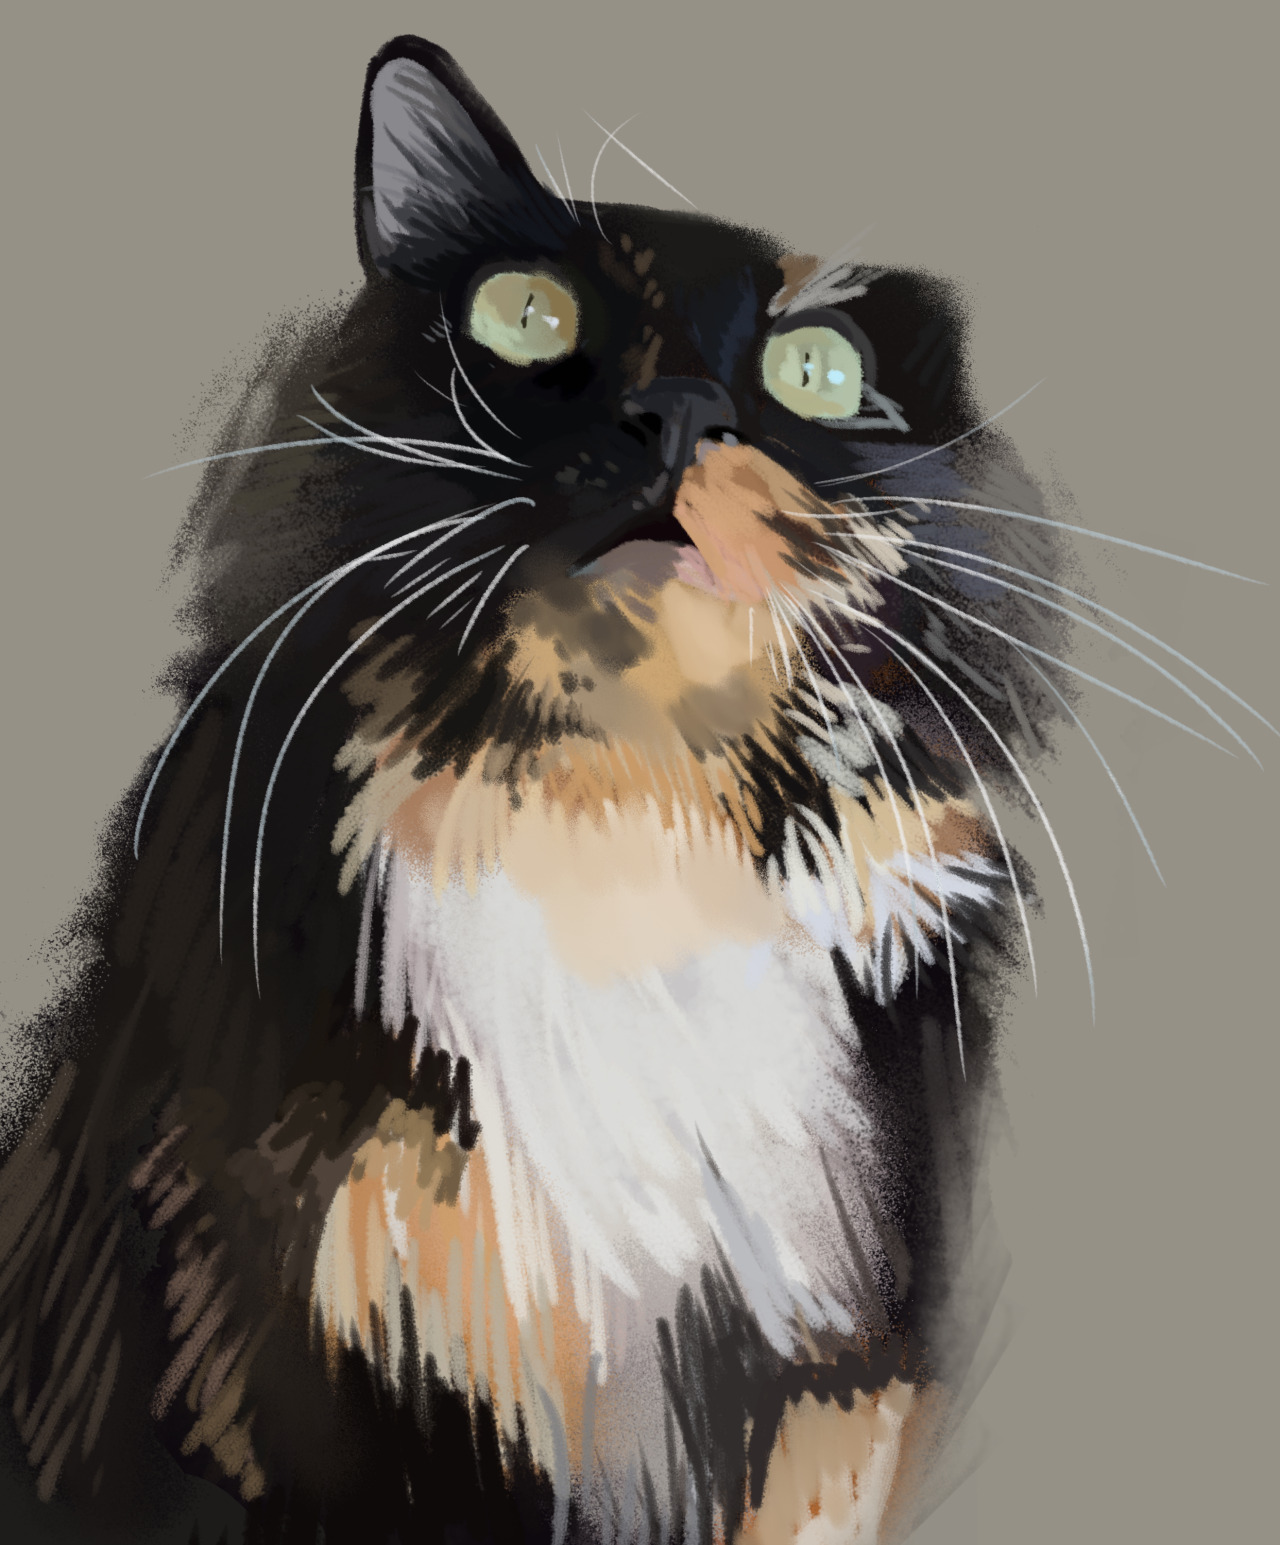 December 28, 2019. painting of my cat!